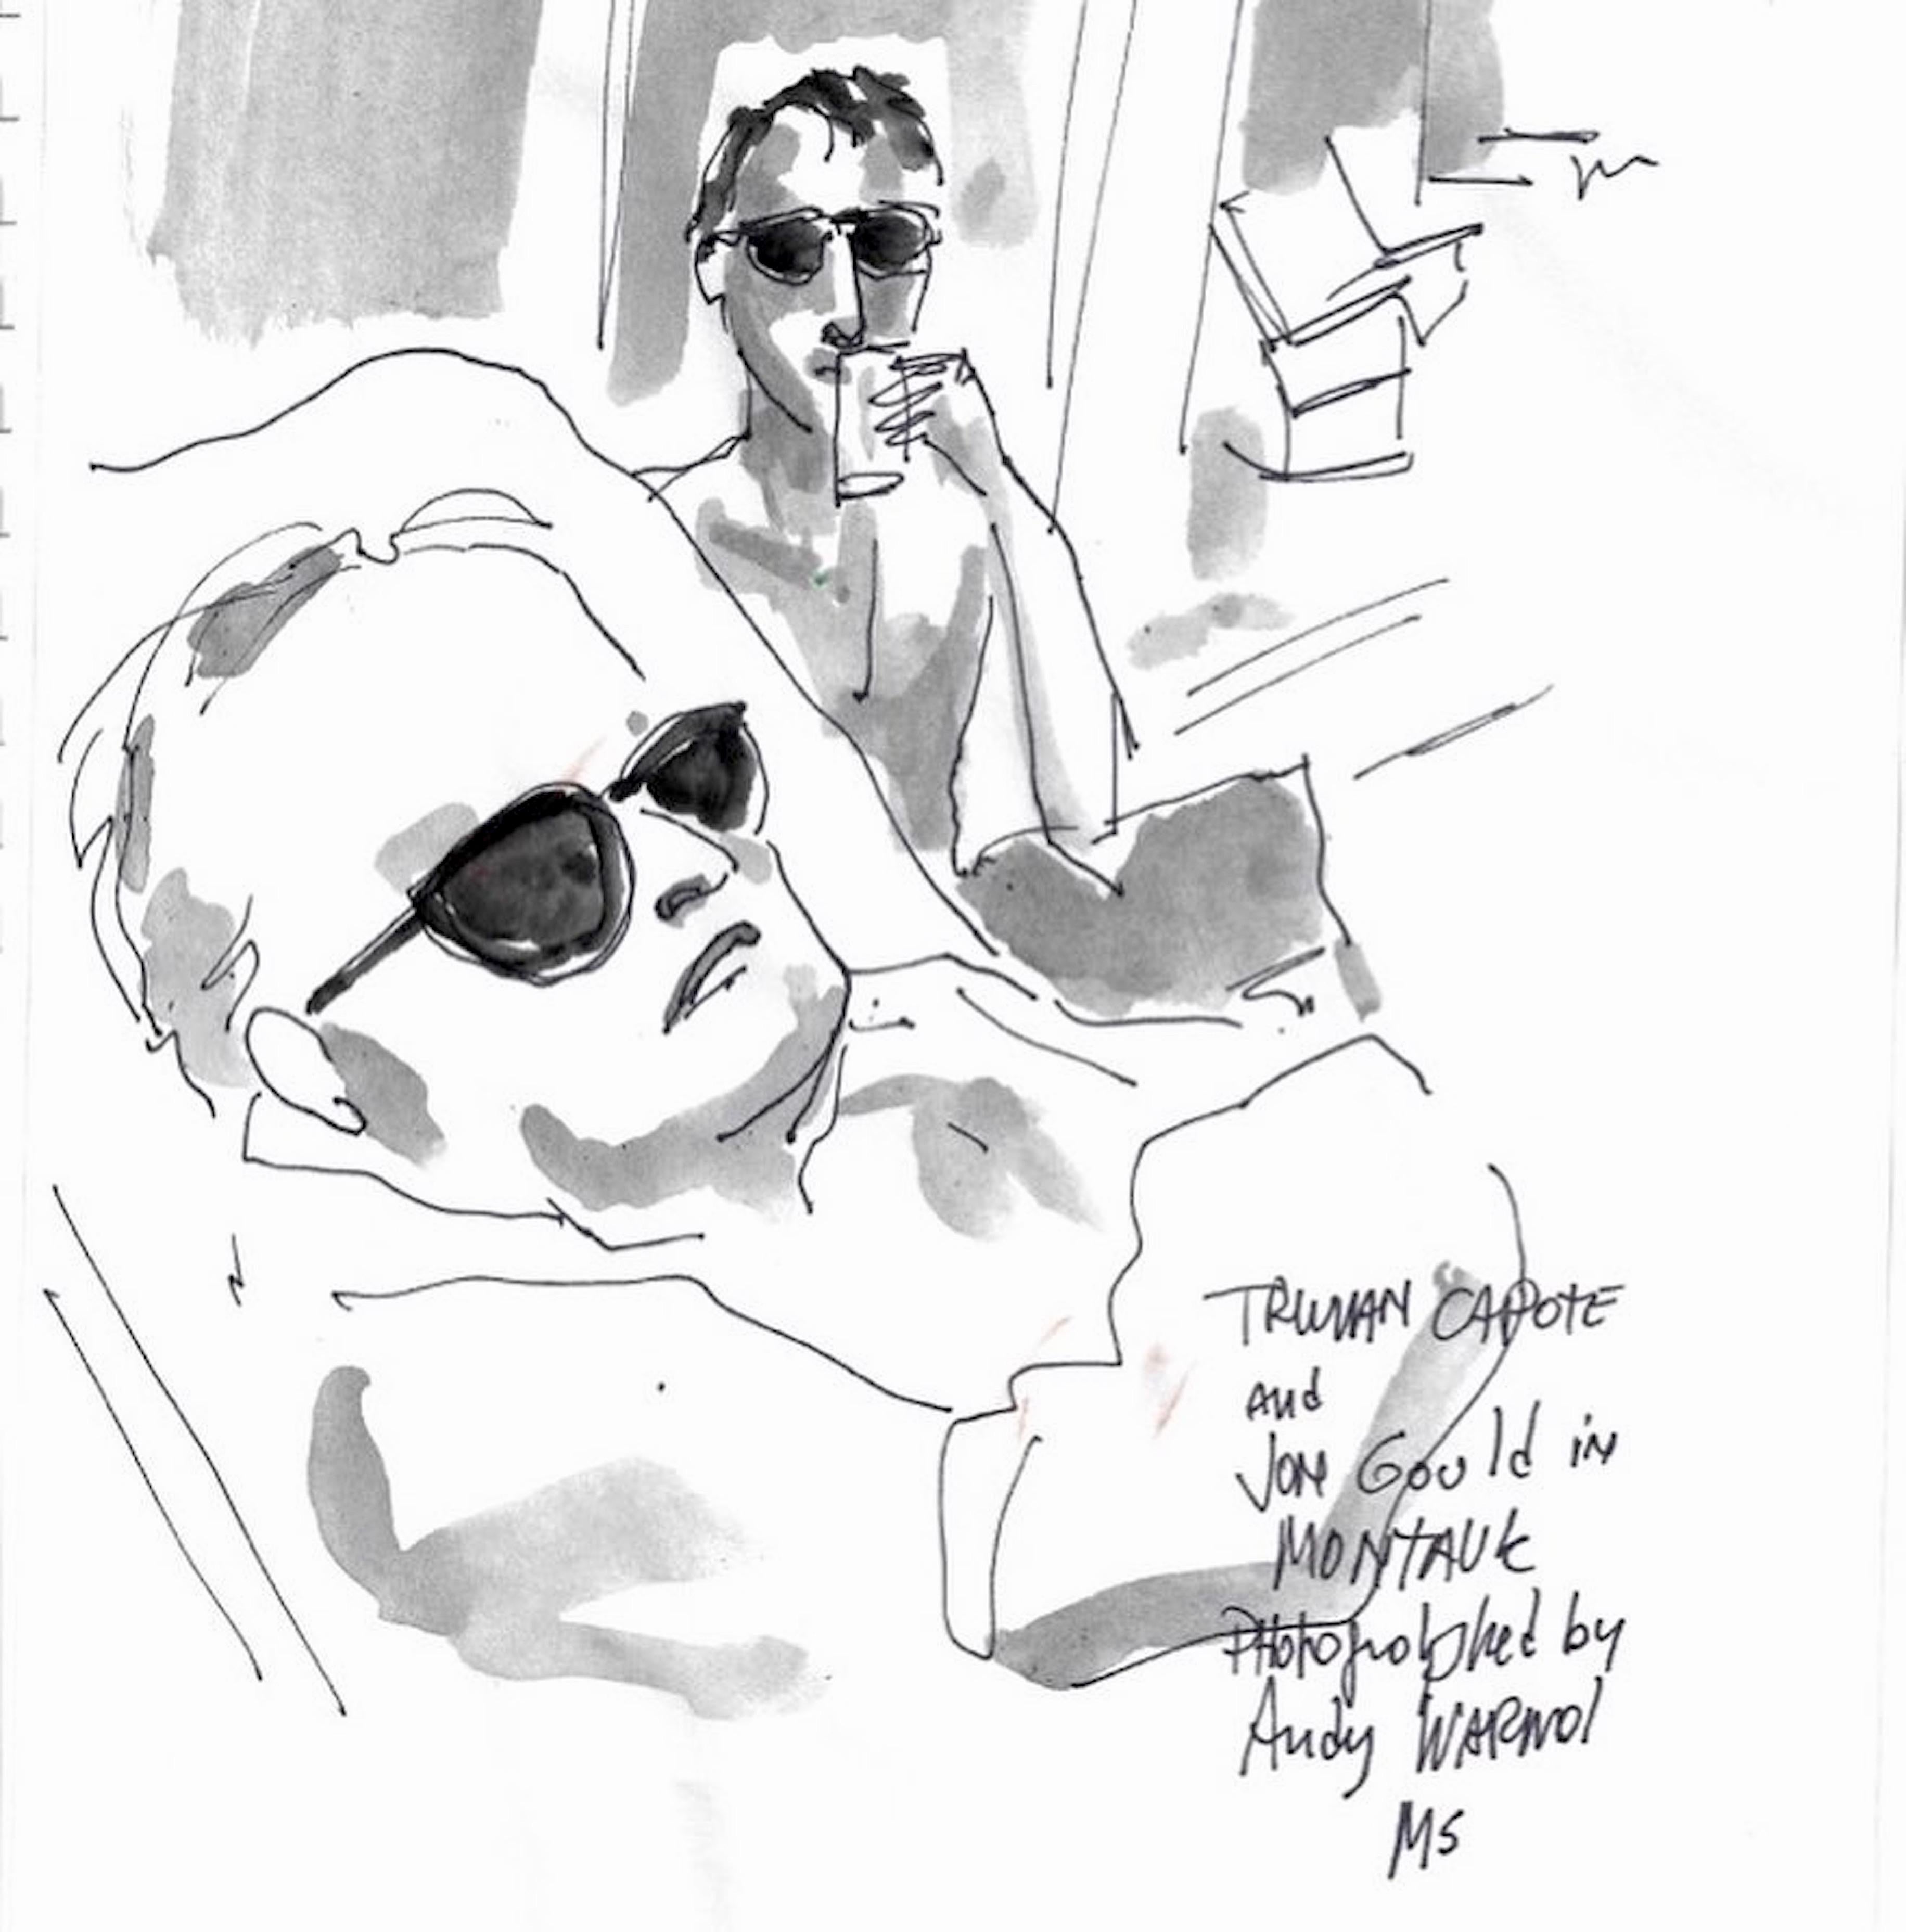 Truman Capote and Jon Gould in Montauk, The Love of Andy series - Art by Manuel Santelices